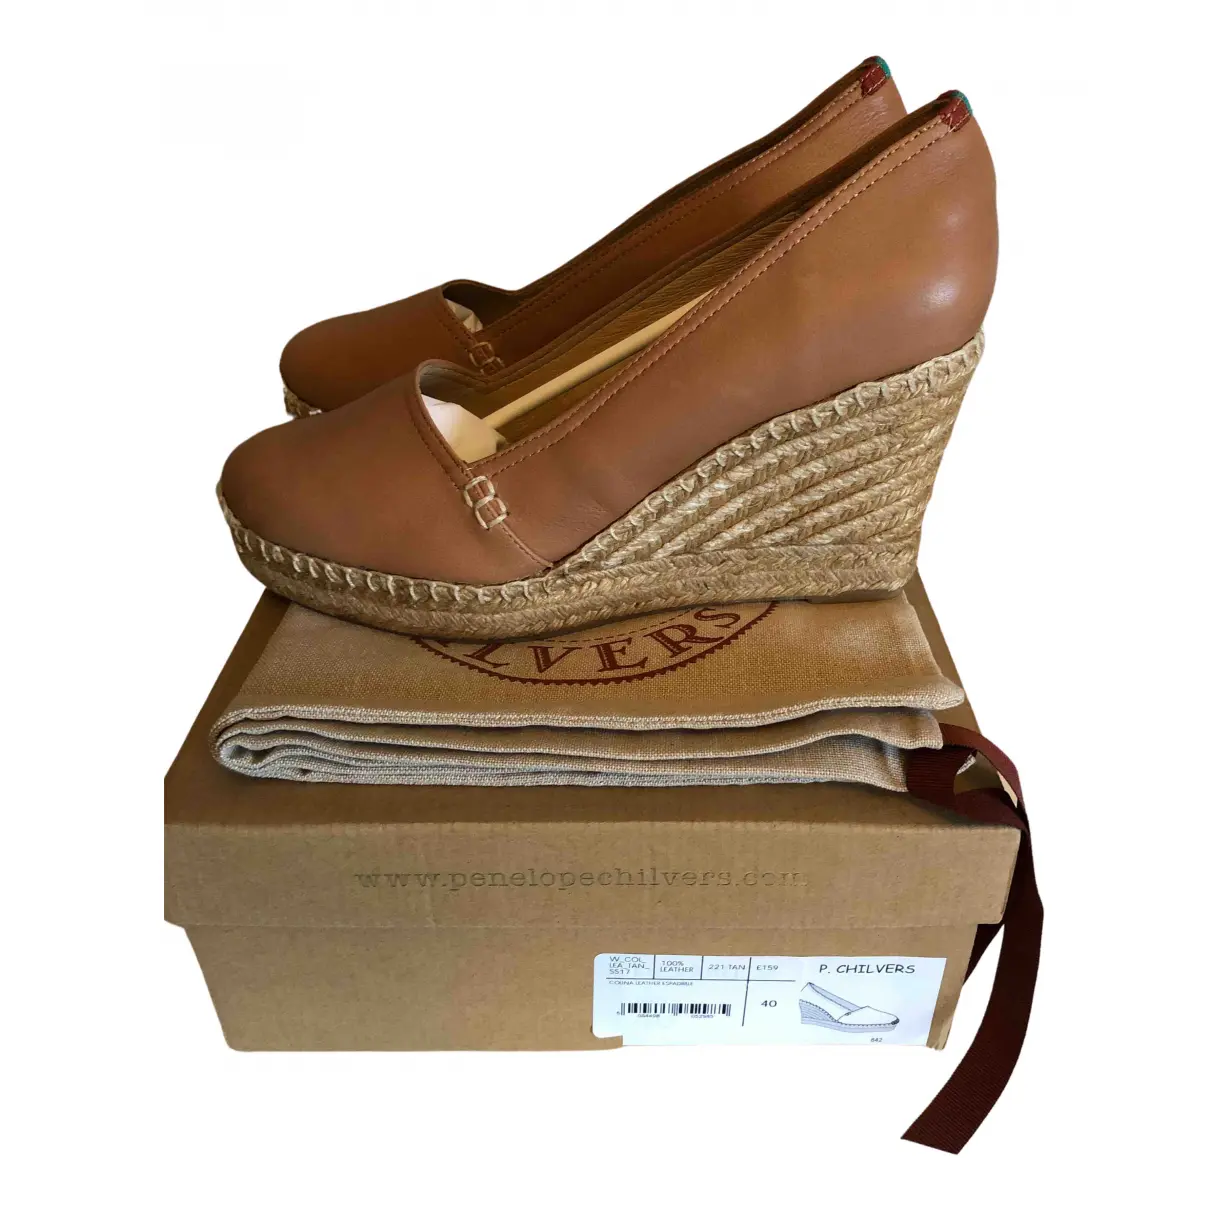 Leather espadrilles Penelope Chilvers